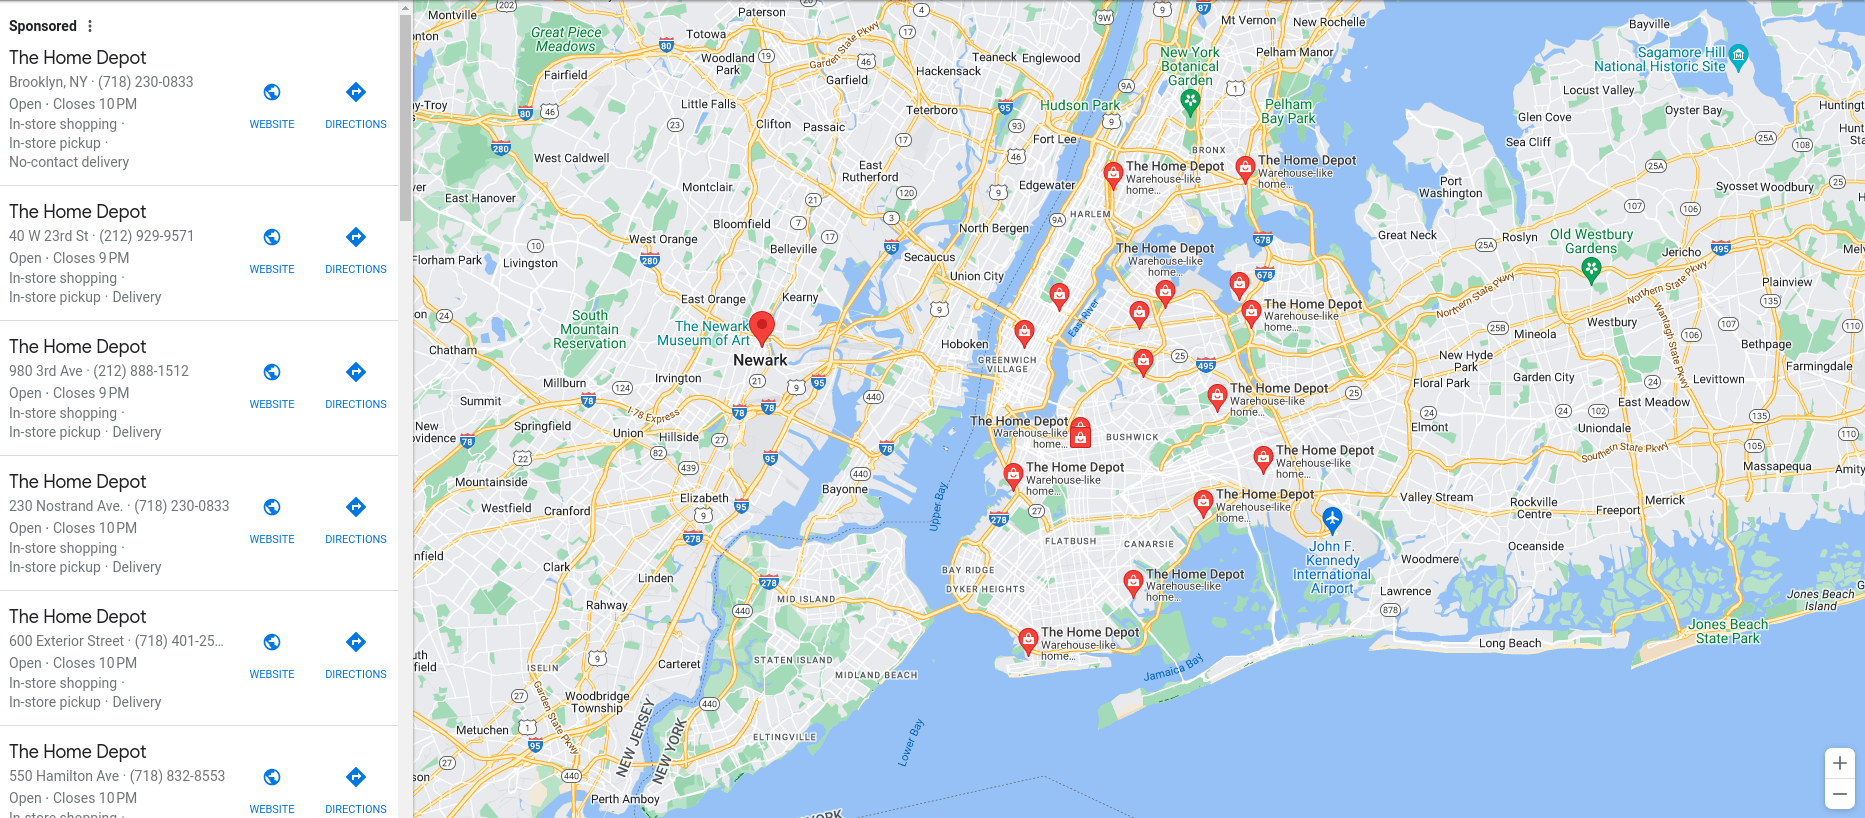 Home Depot stores in nyc